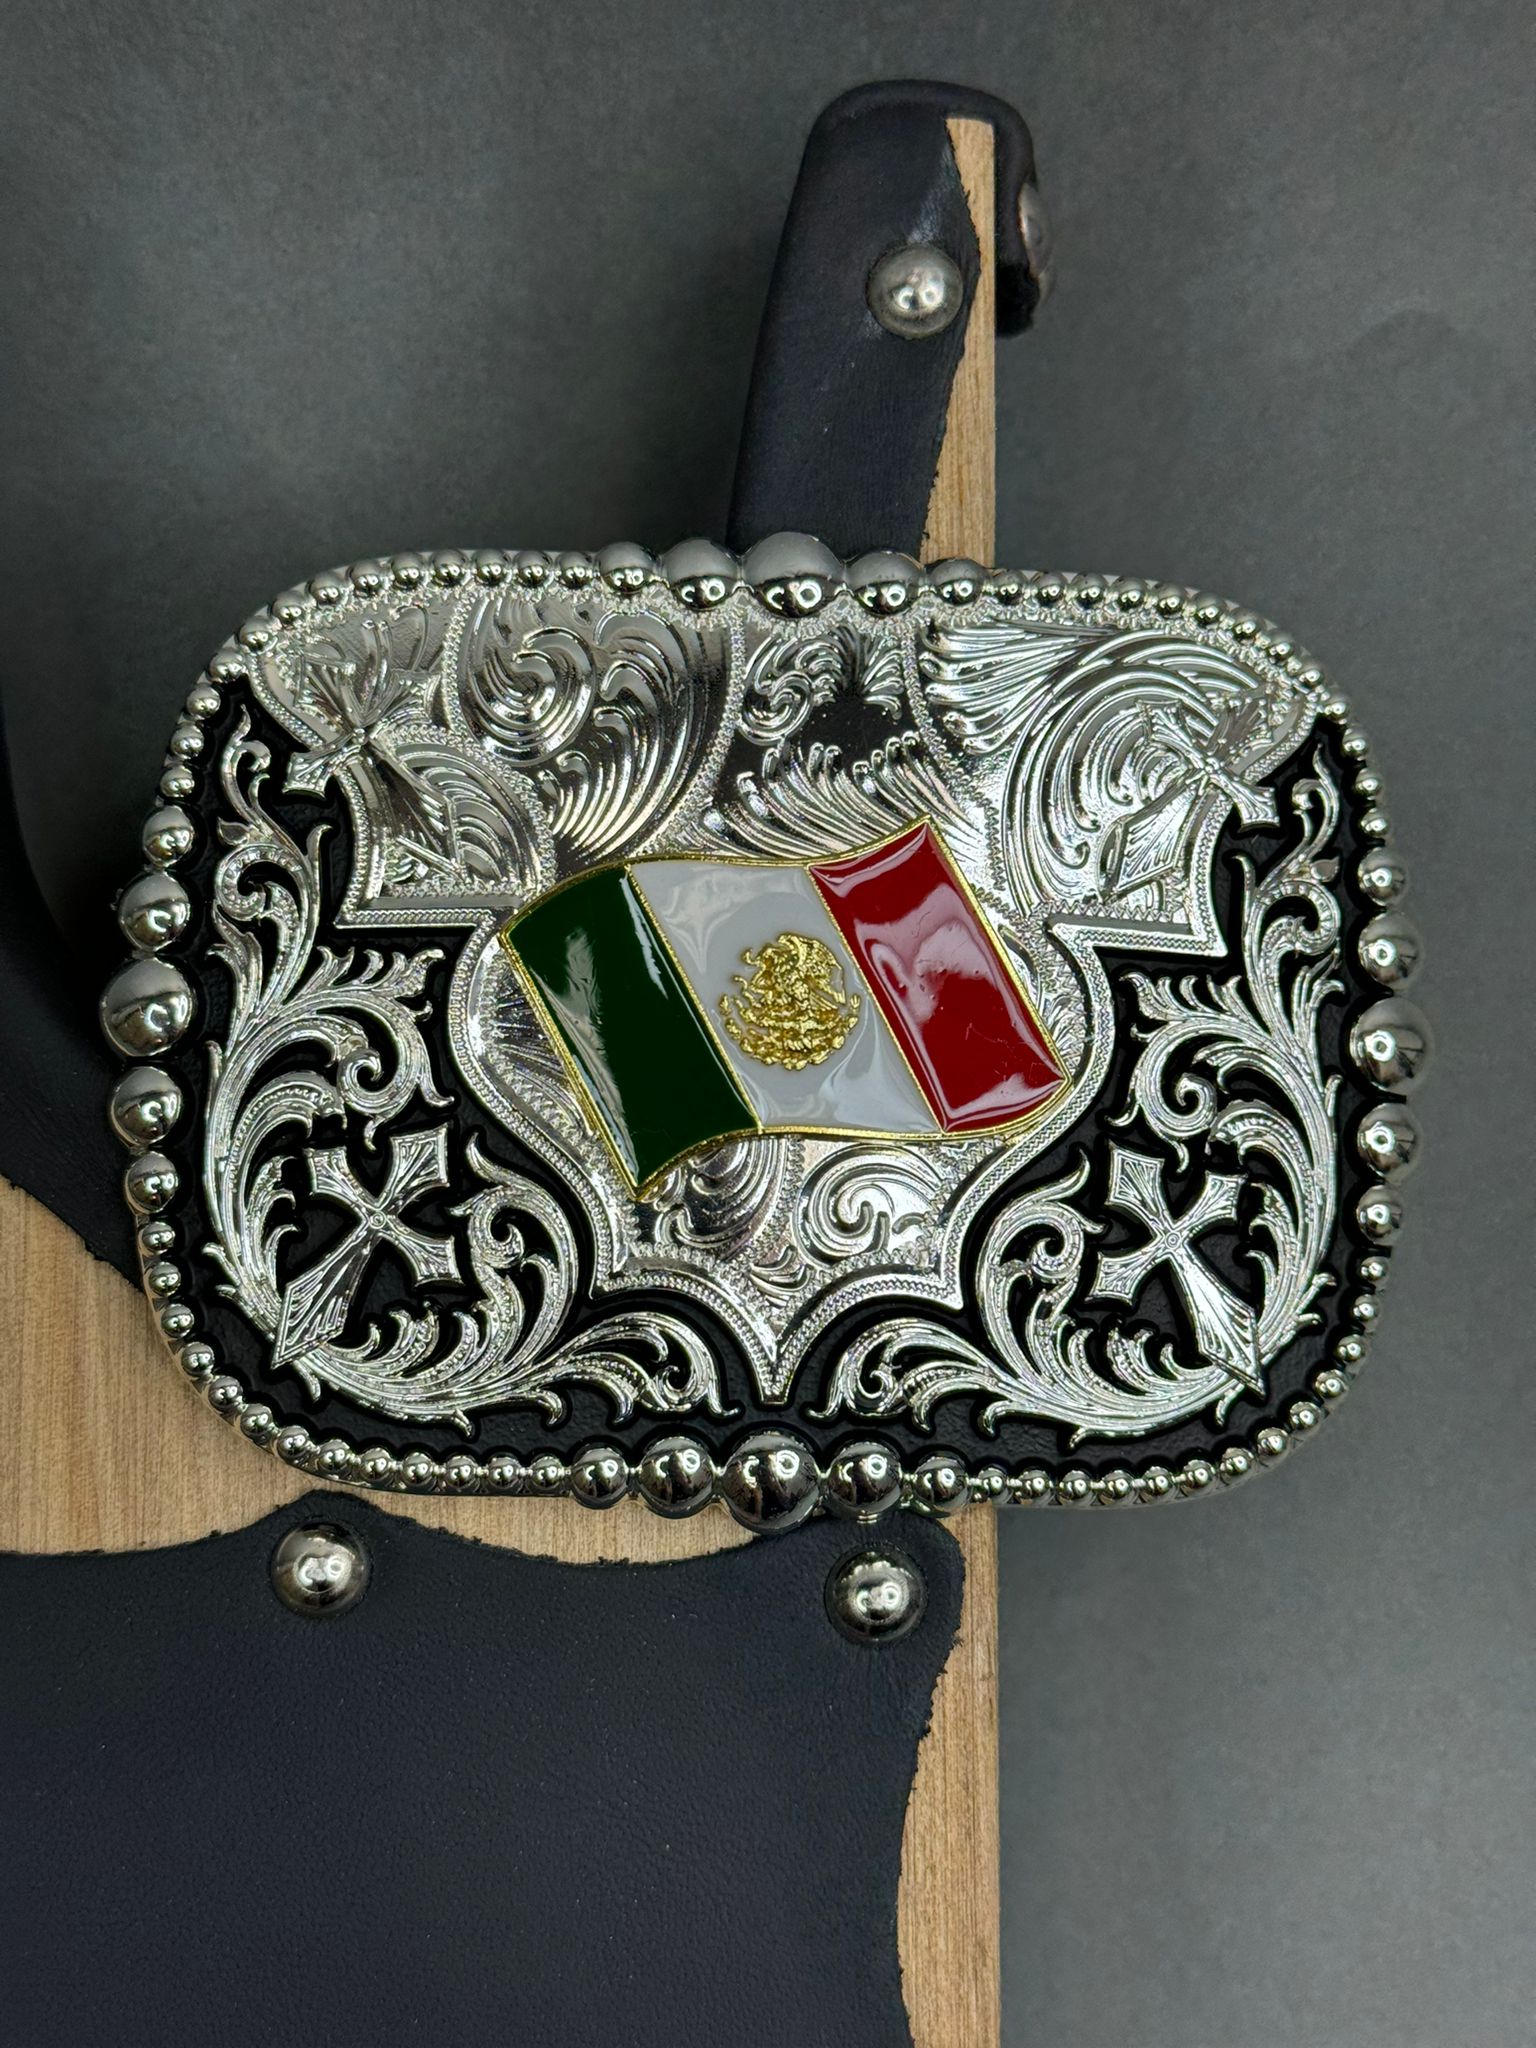 ROUNDED SQUARE SILVER WITH BLACK MEXICO FLAG BUCKLE